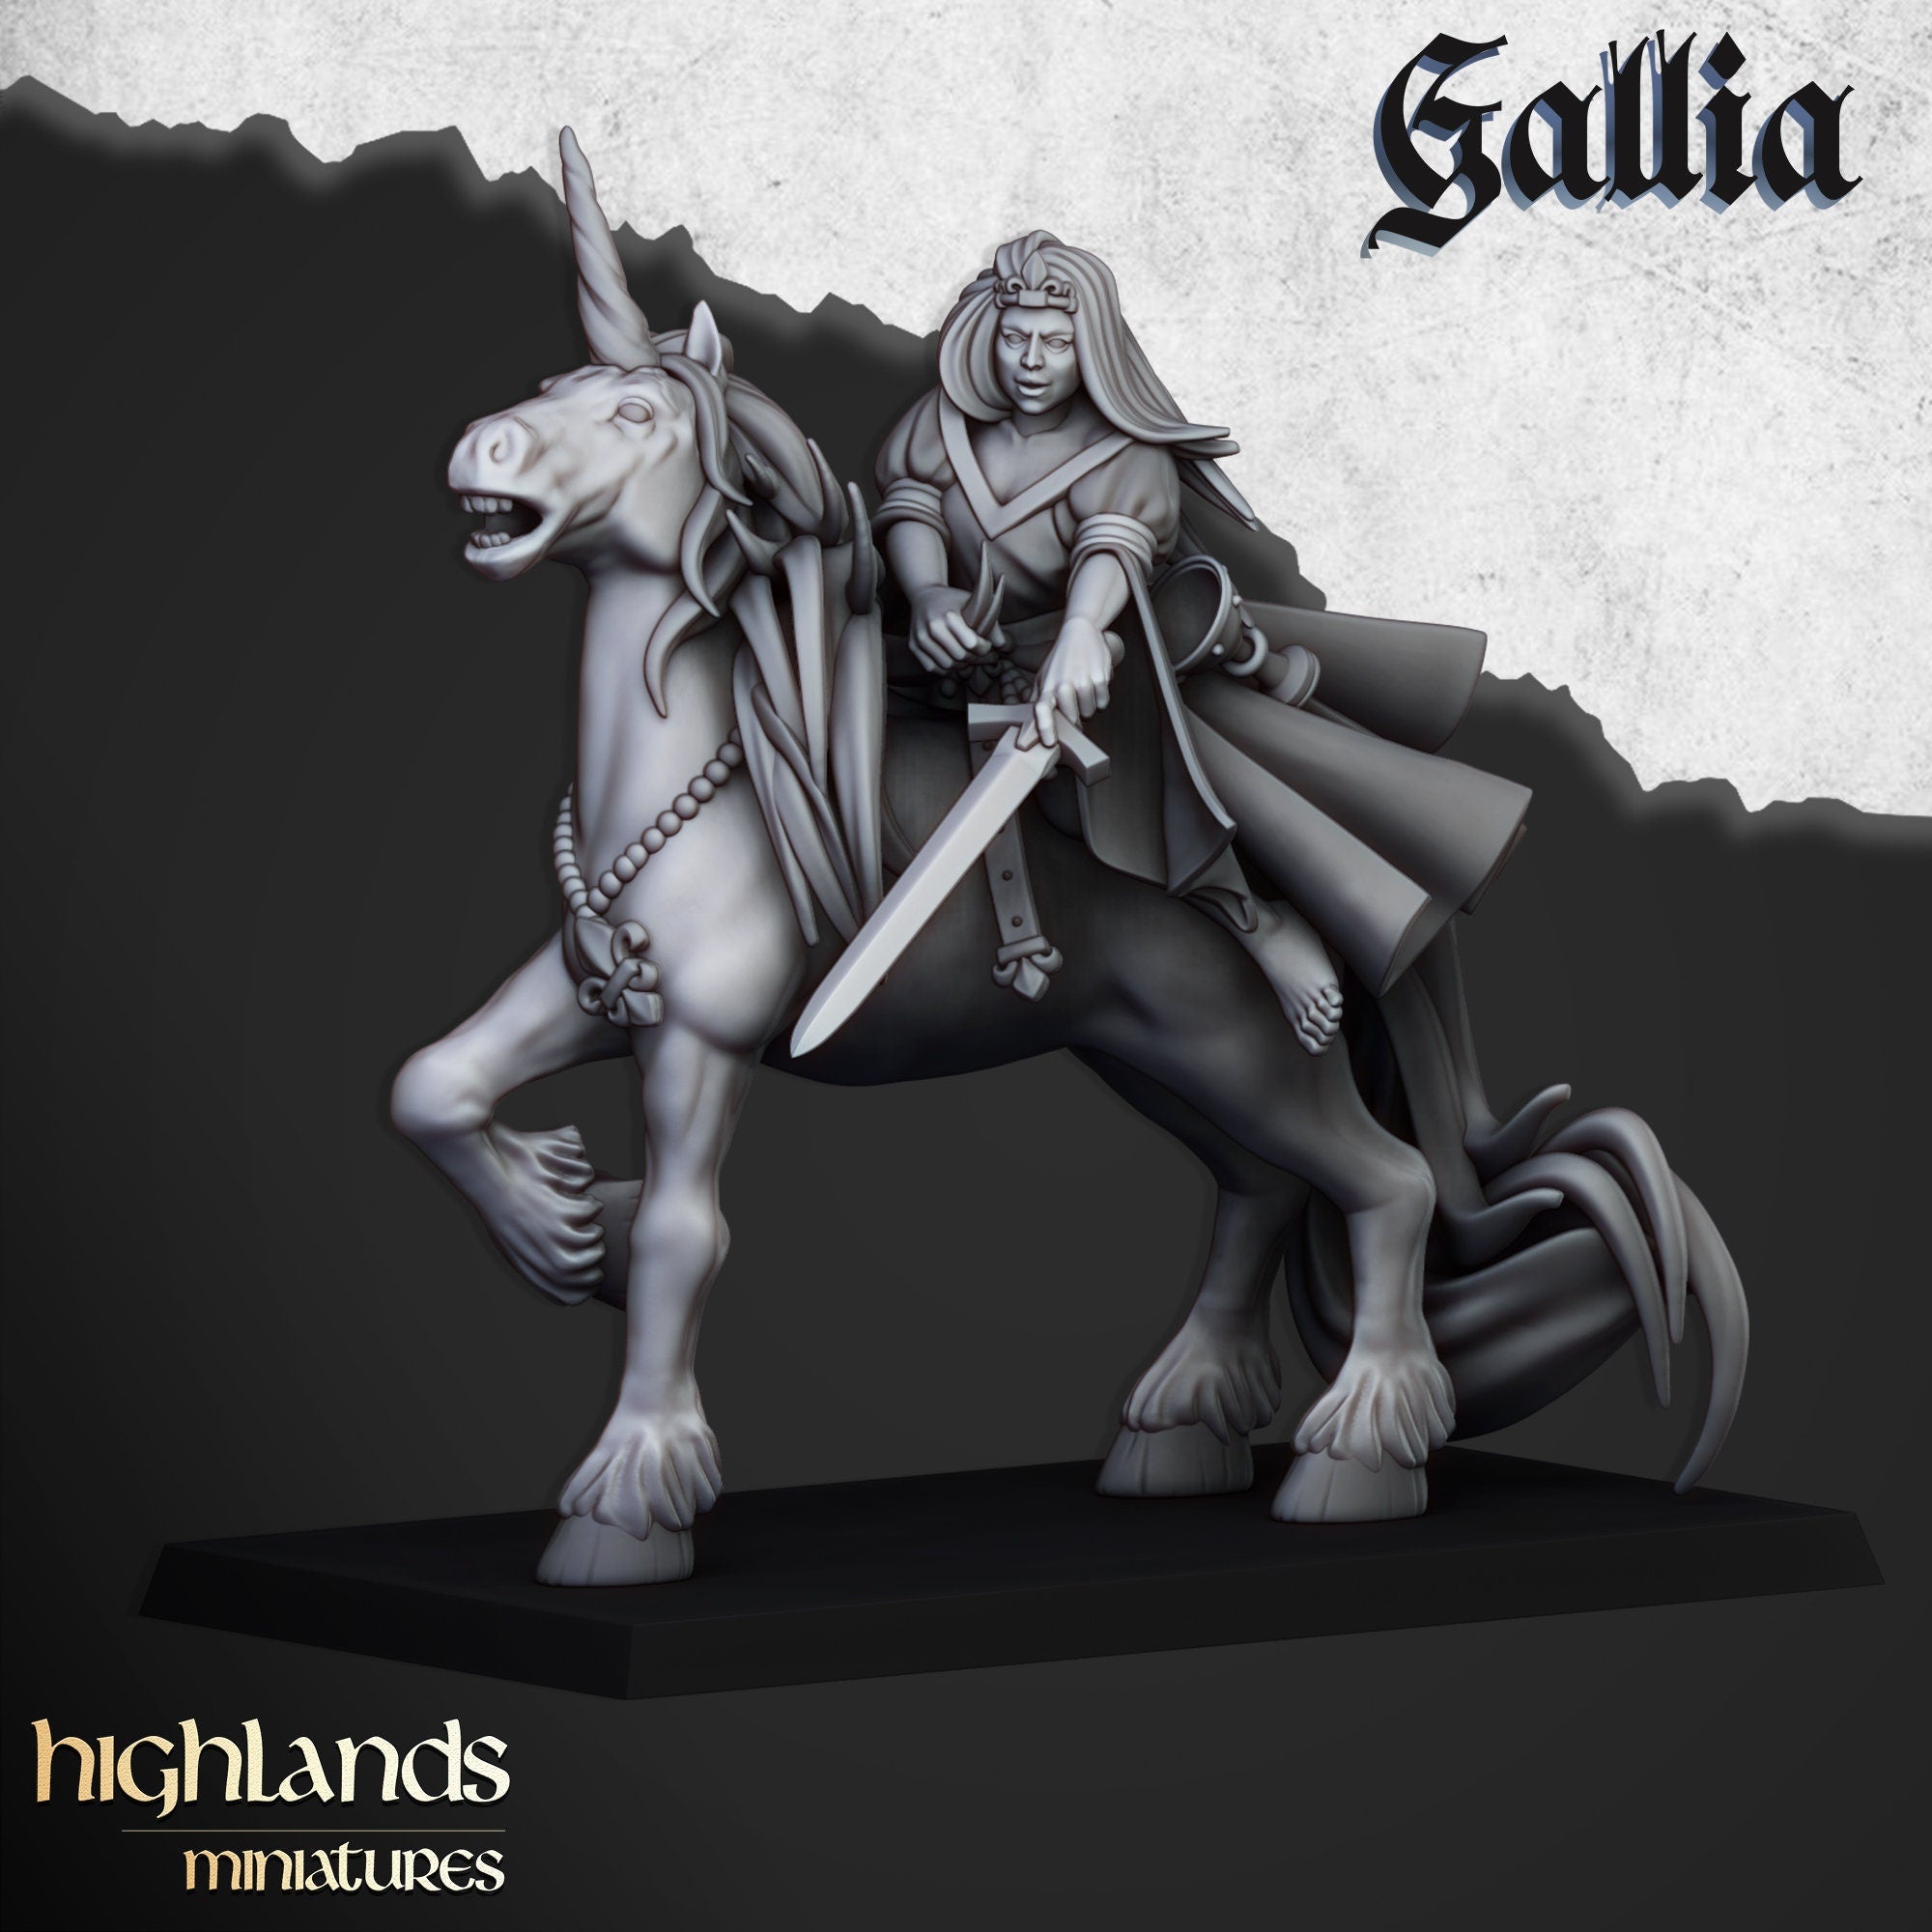 The Lady of Gallia by Highlands Miniatures